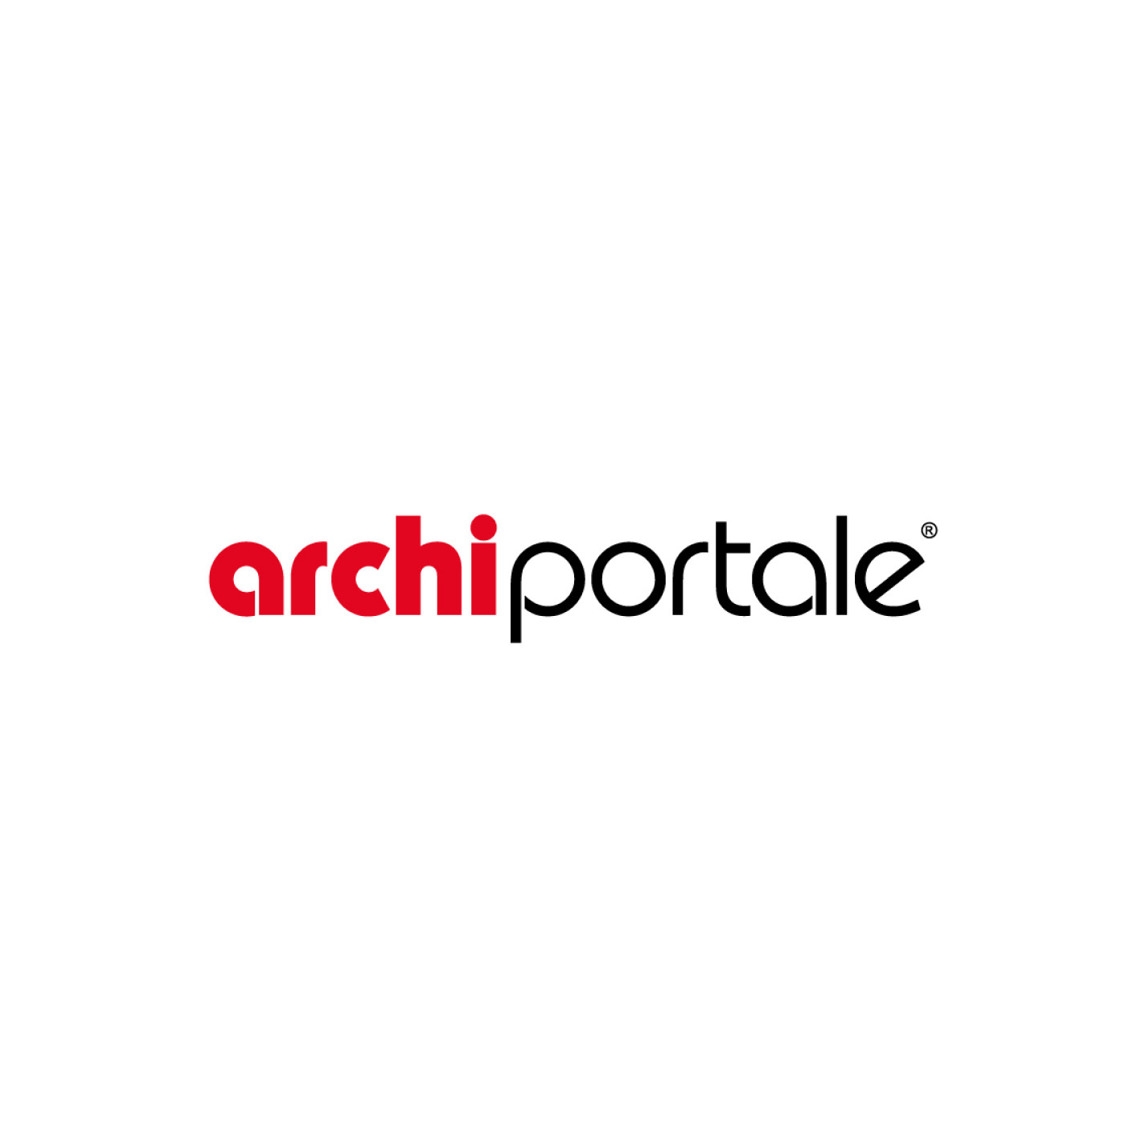 Archiportale, 2019 MMAPROJECTS S.R.L.